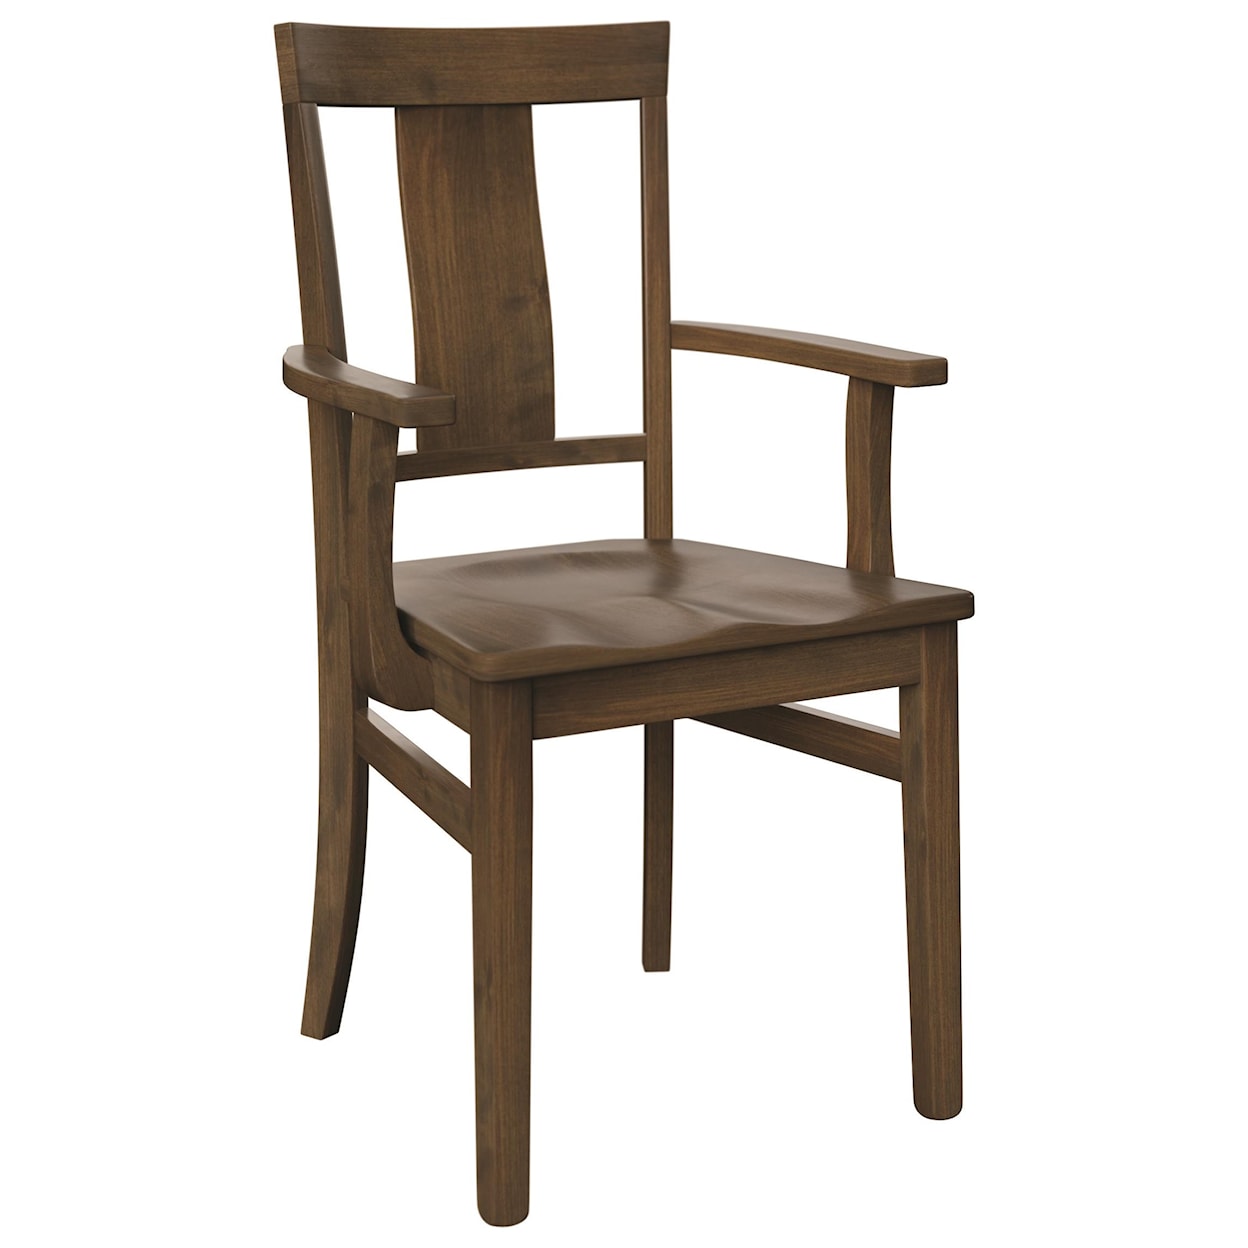 Wengerd Wood Products Tennessee Arm Chair